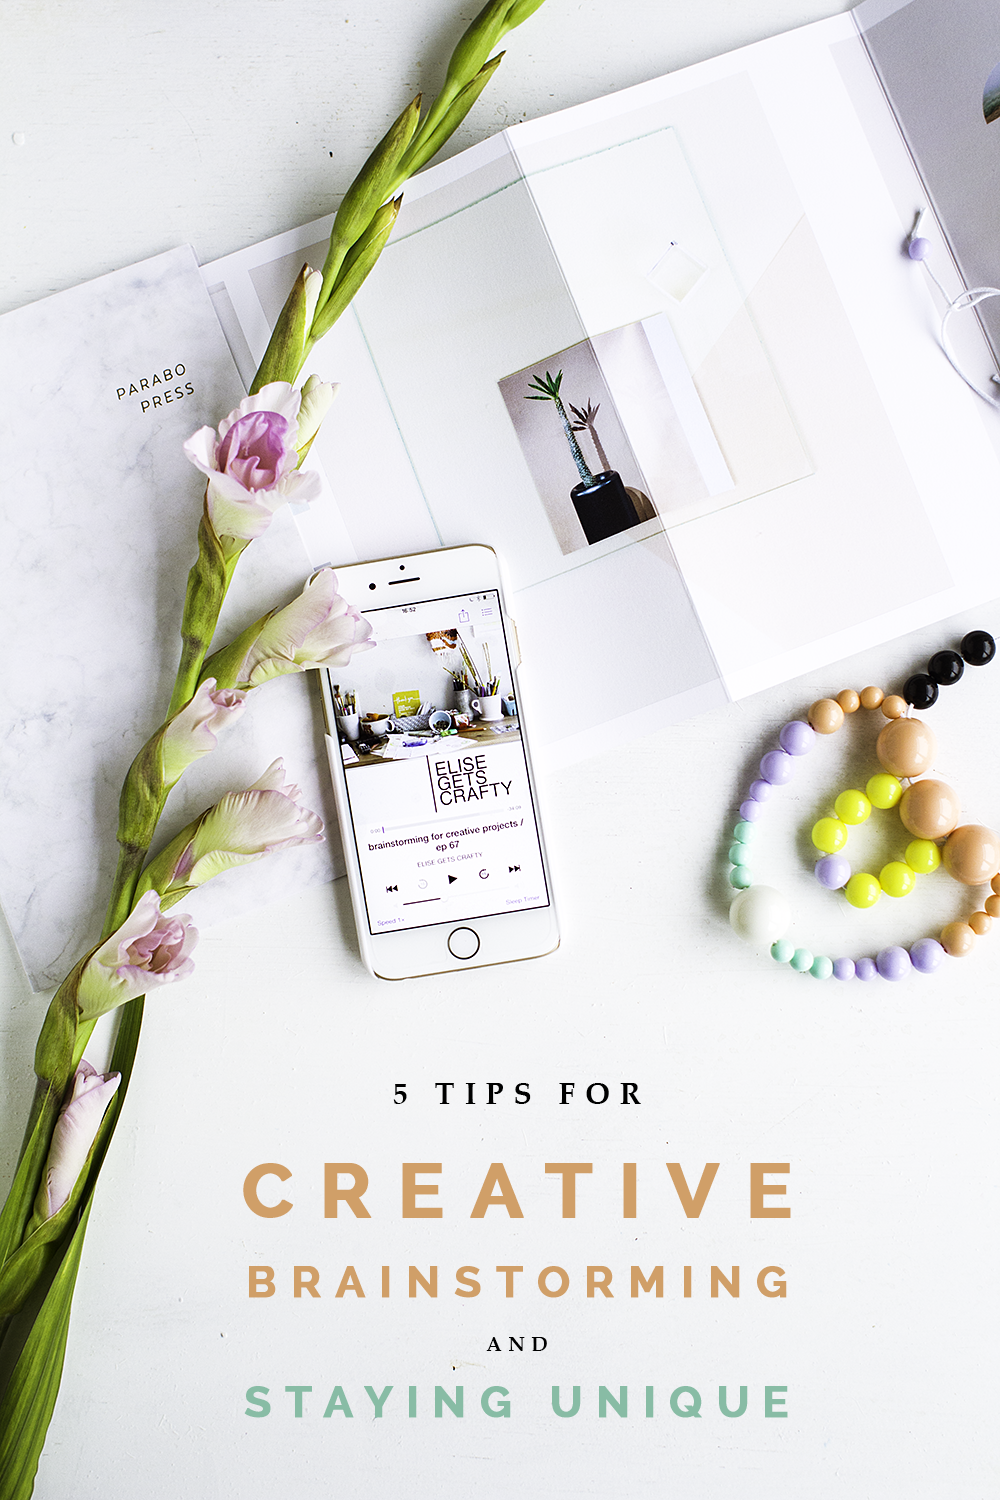 Five tips for creative brainstorming and staying unique | Fall For DIY